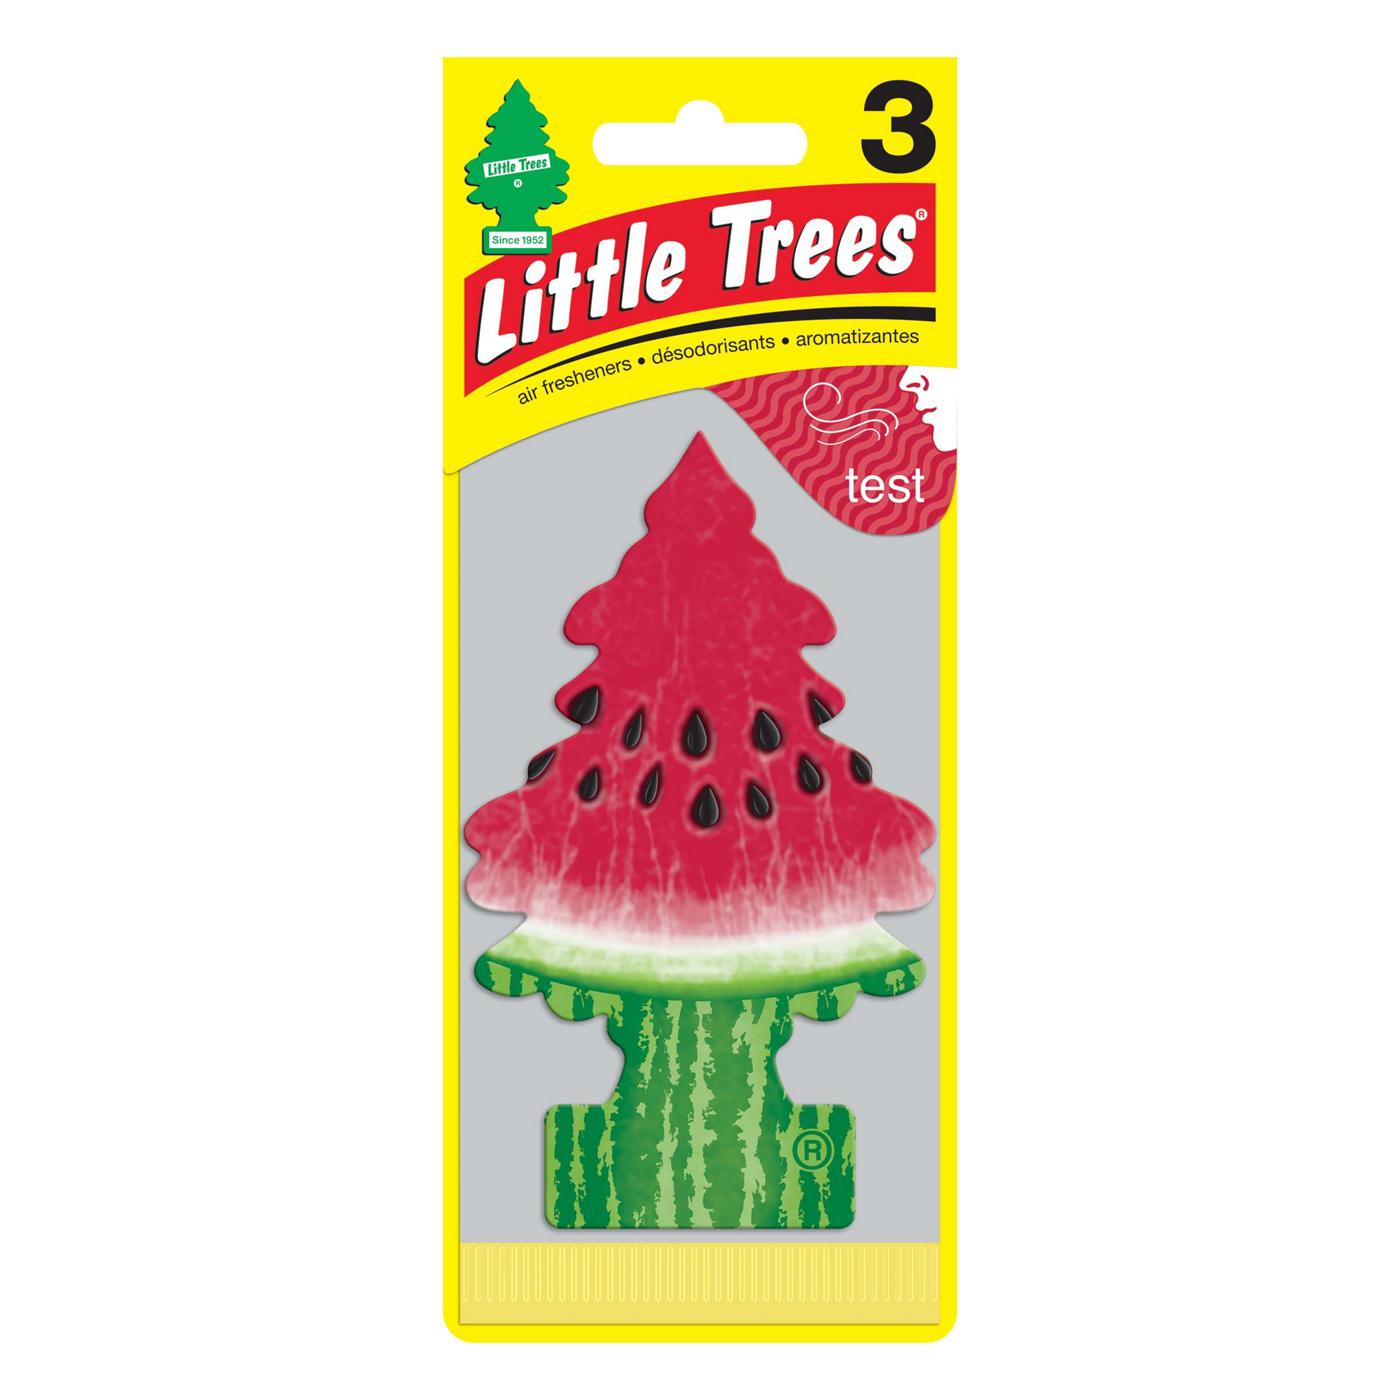 Little Trees Car Air Fresheners - Watermelon; image 1 of 2